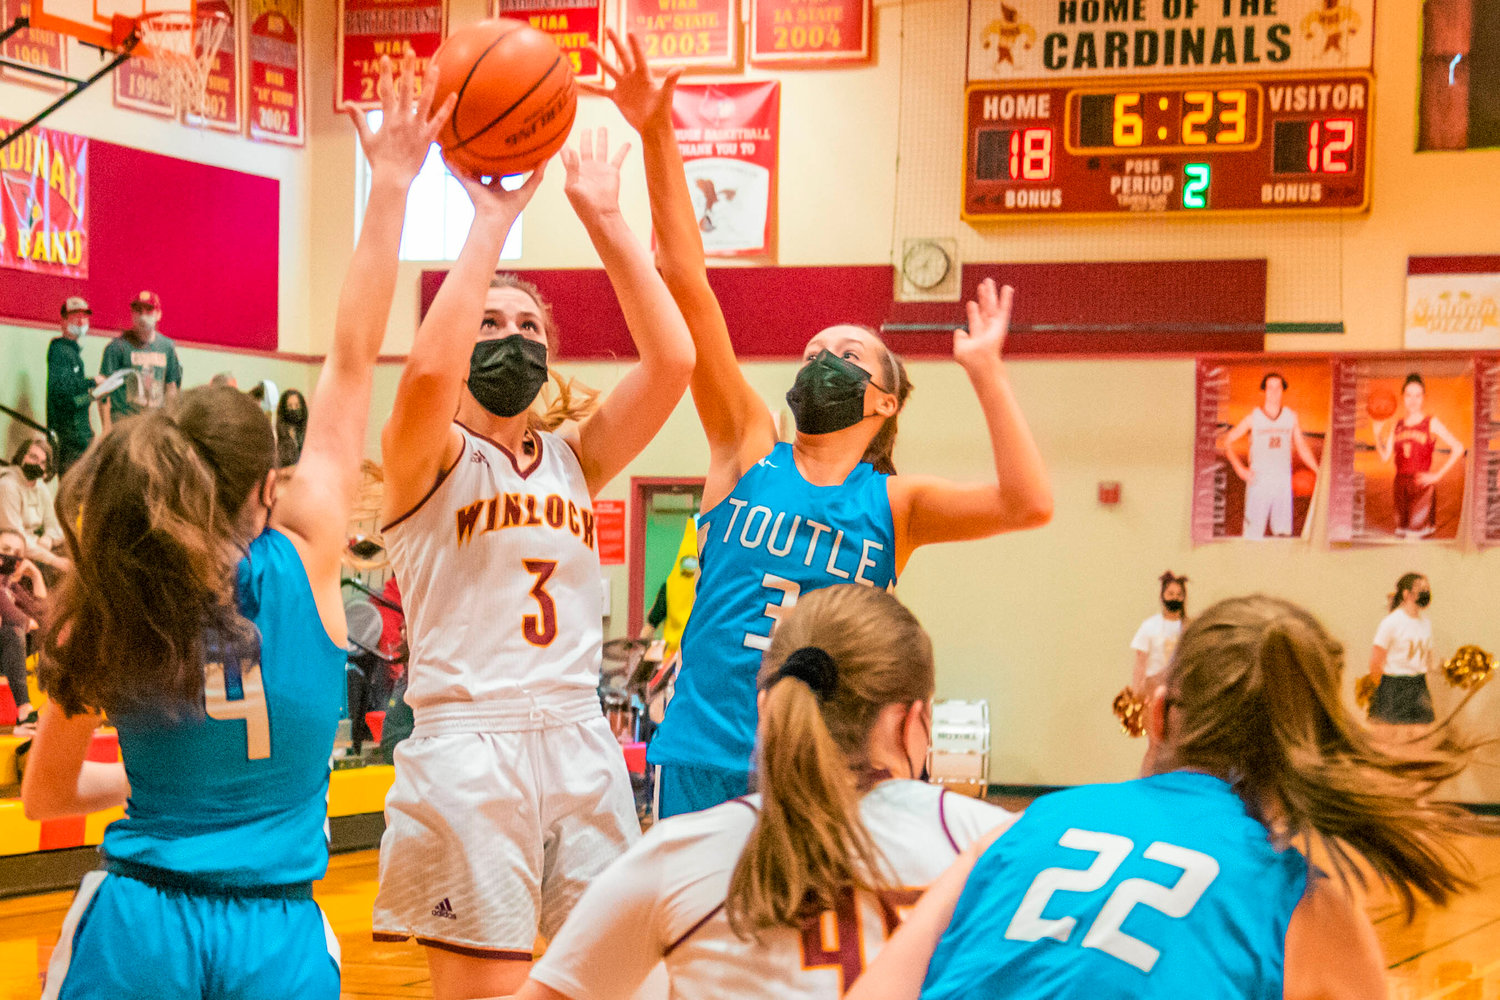 Winlock’s Karlie Jones (3) puts up a shot while surrounded by defenders during a game on Thursday.